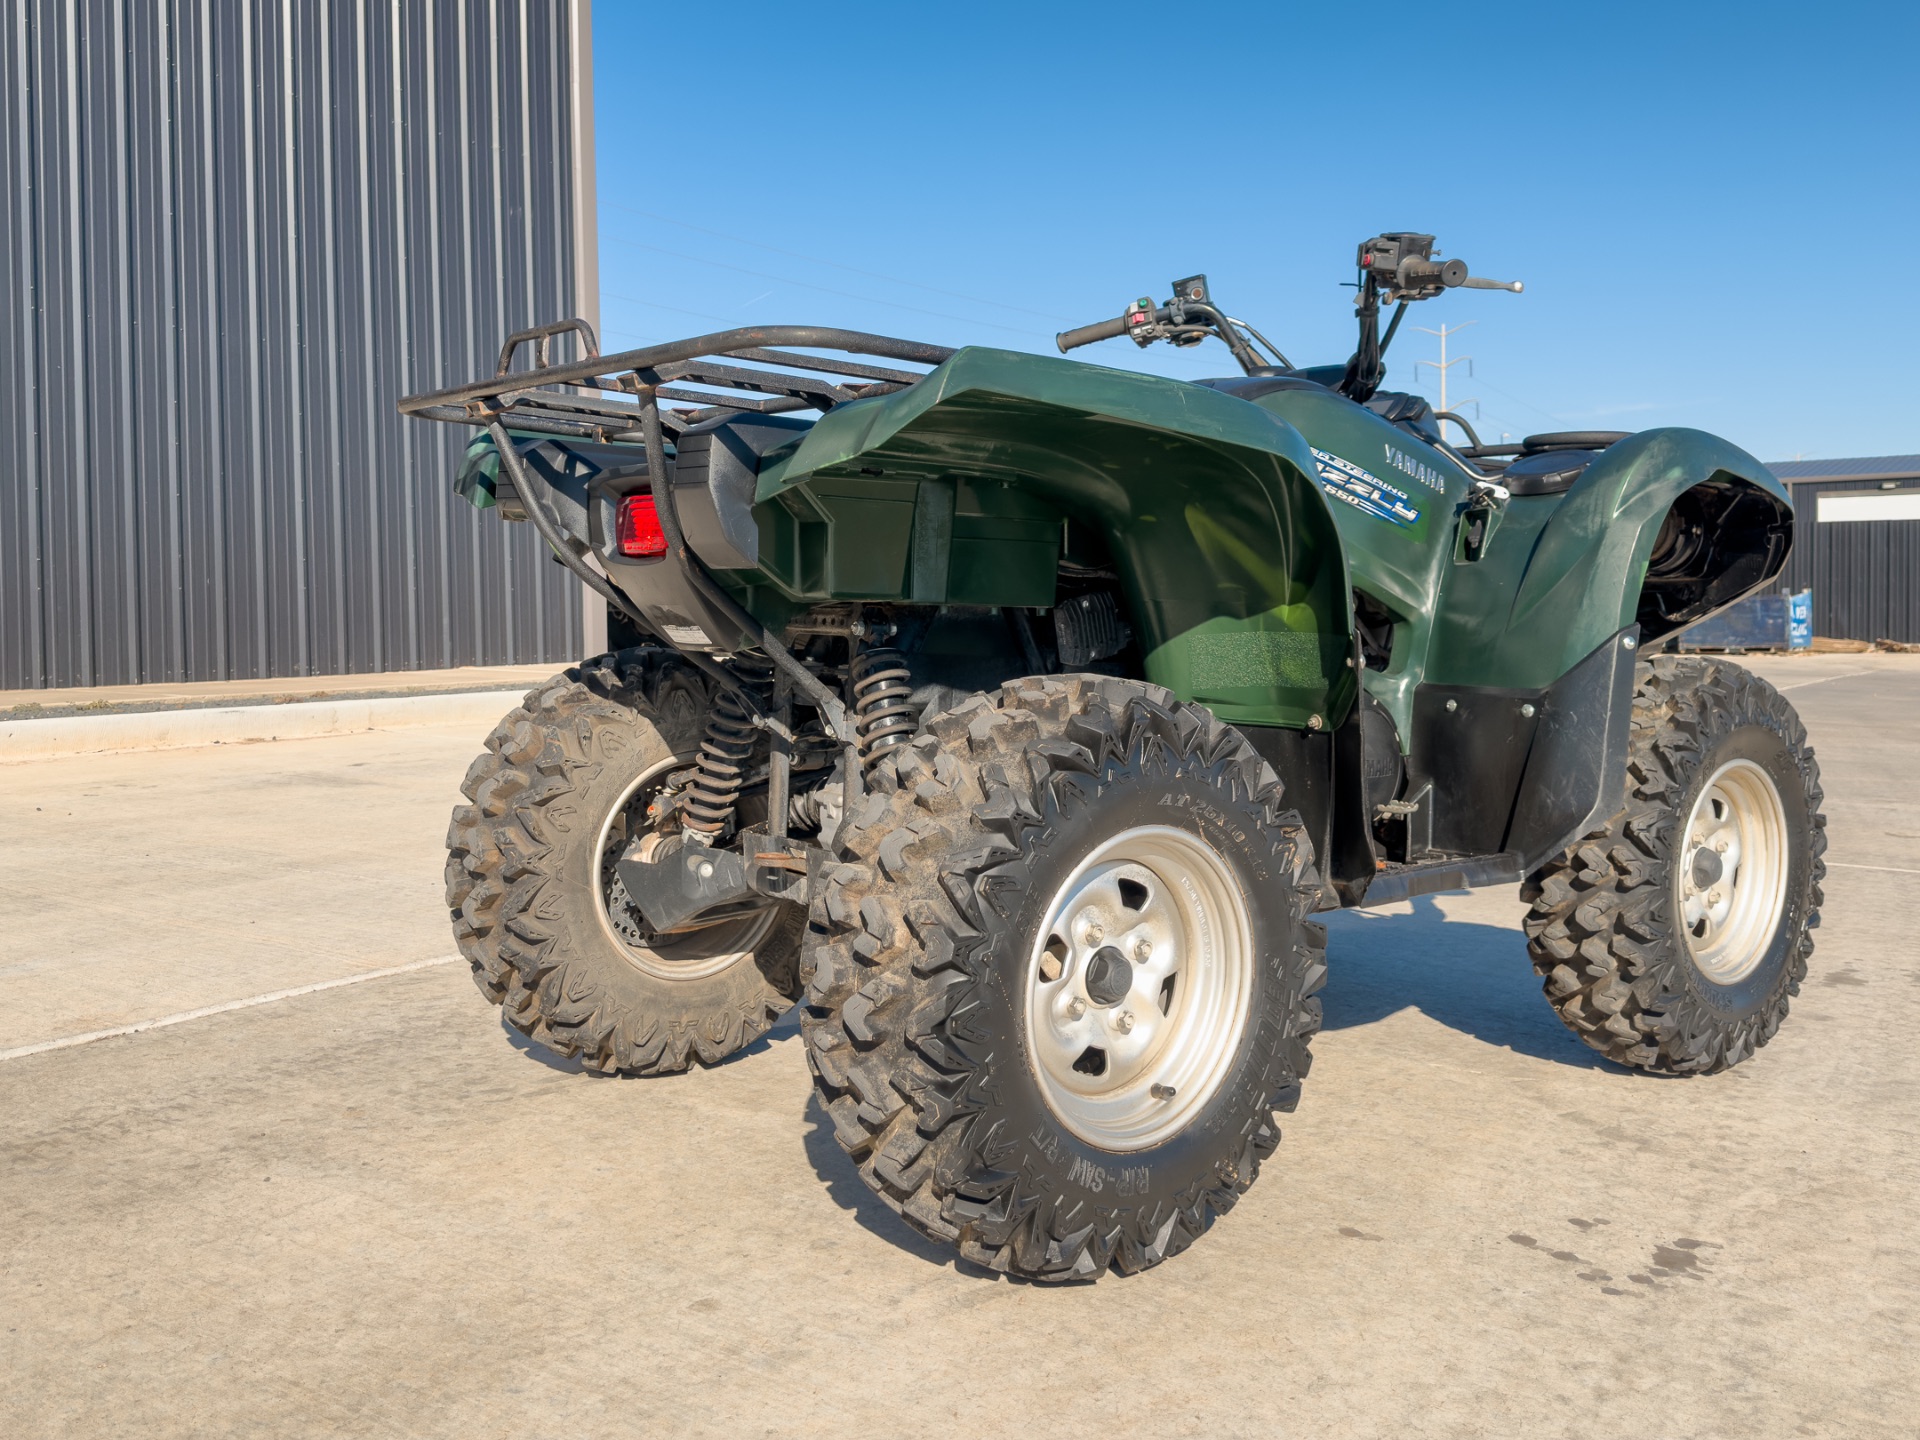 2011 Yamaha Grizzly 550 in Amarillo, Texas - Photo 6